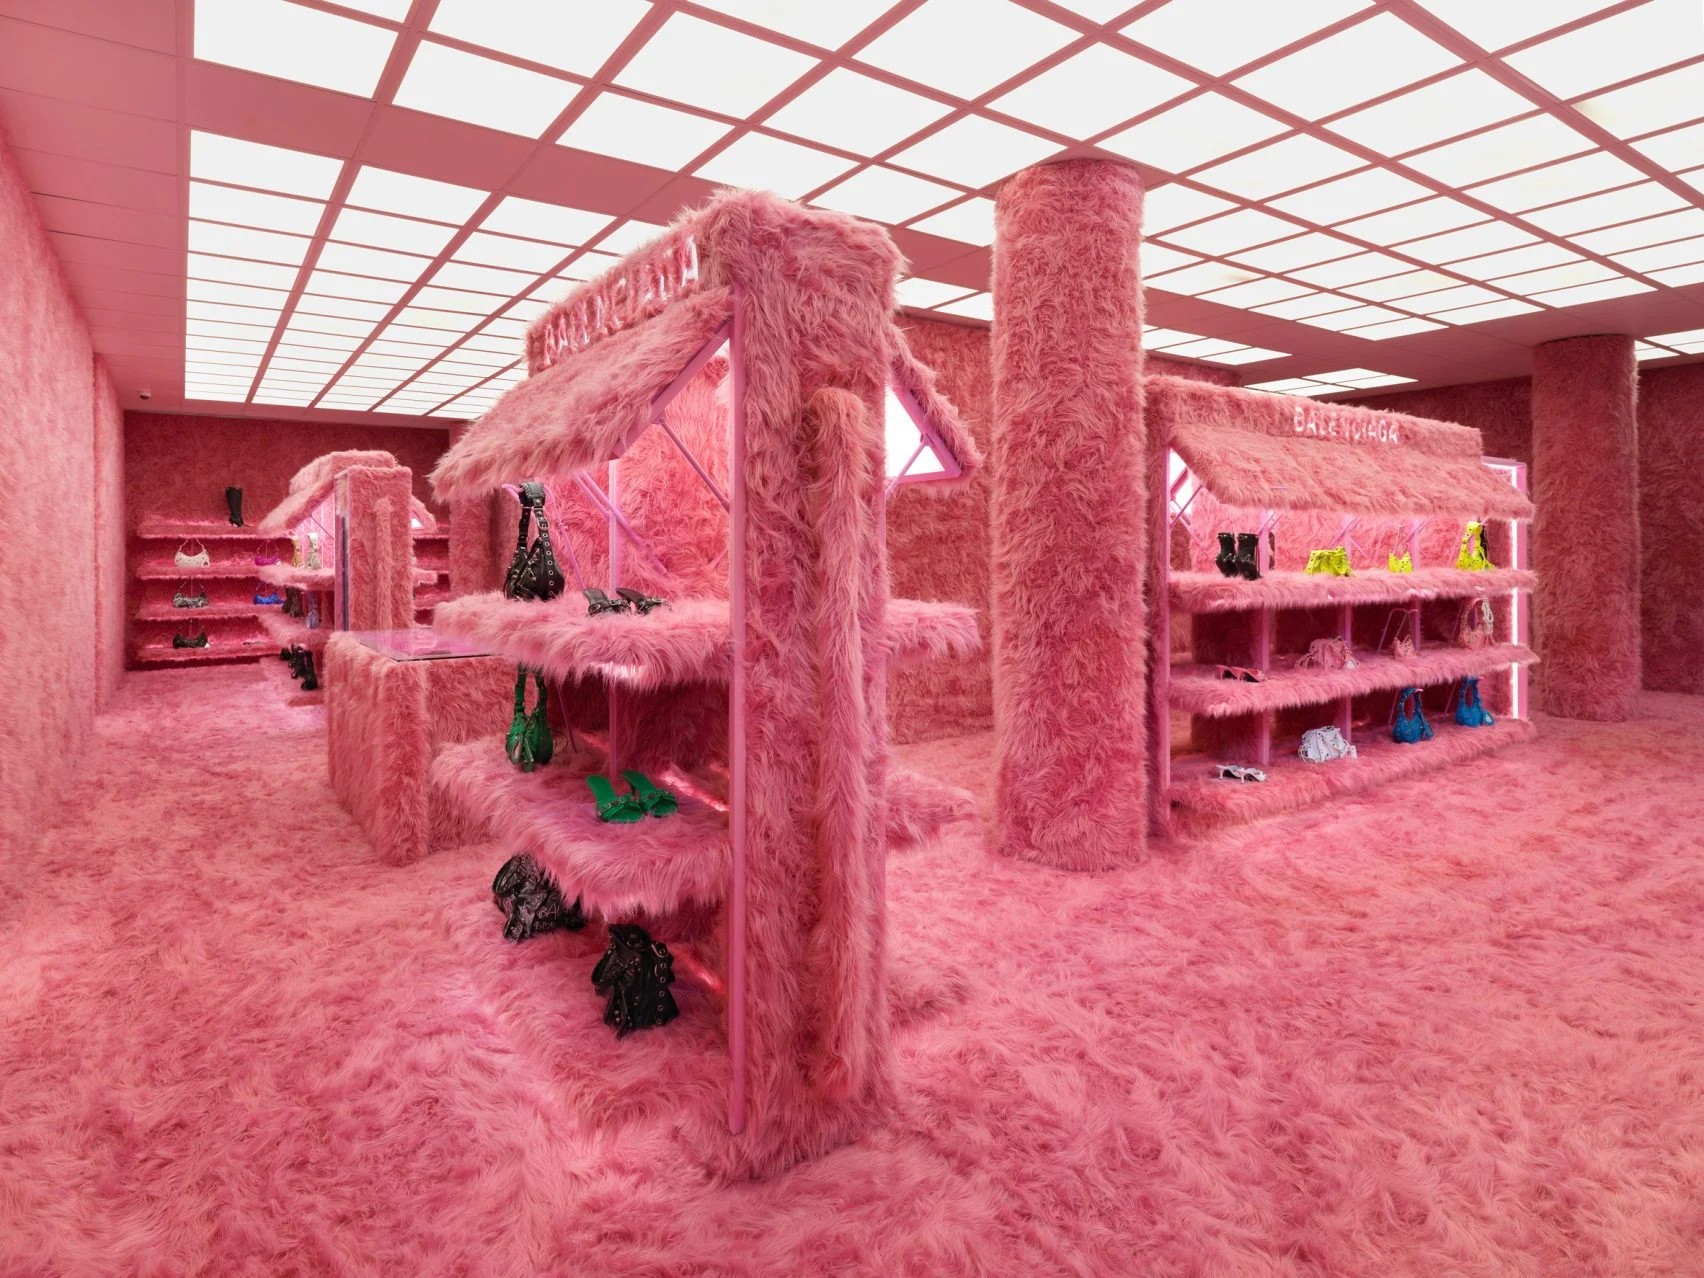 Balenciaga's faux fur-wrapped Mount Street store features in today's Dezeen Agenda newsletter